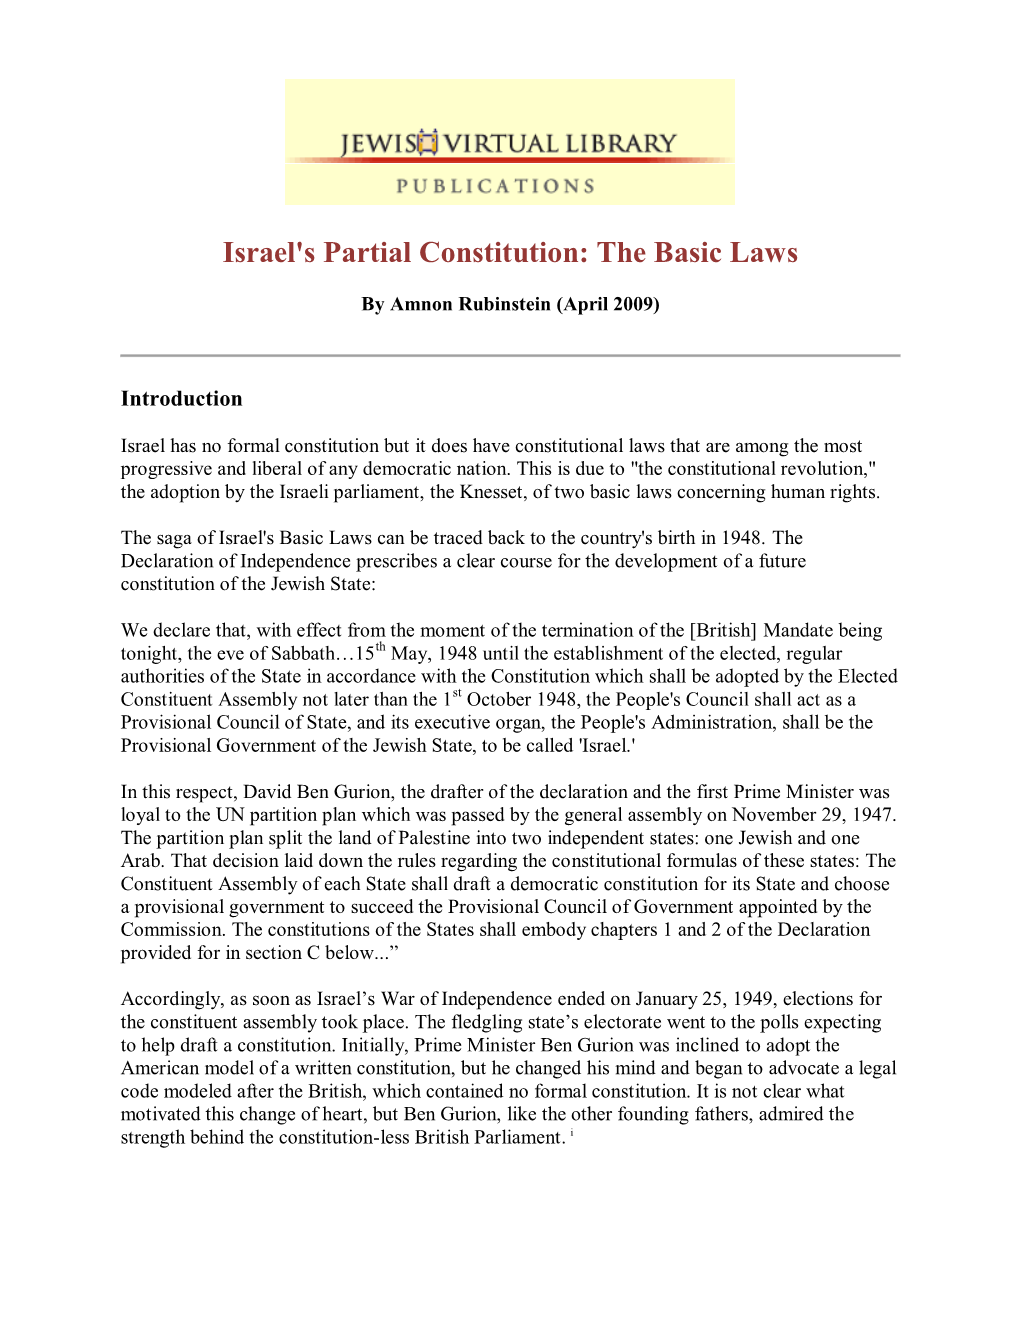 Israel's Partial Constitution: the Basic Laws